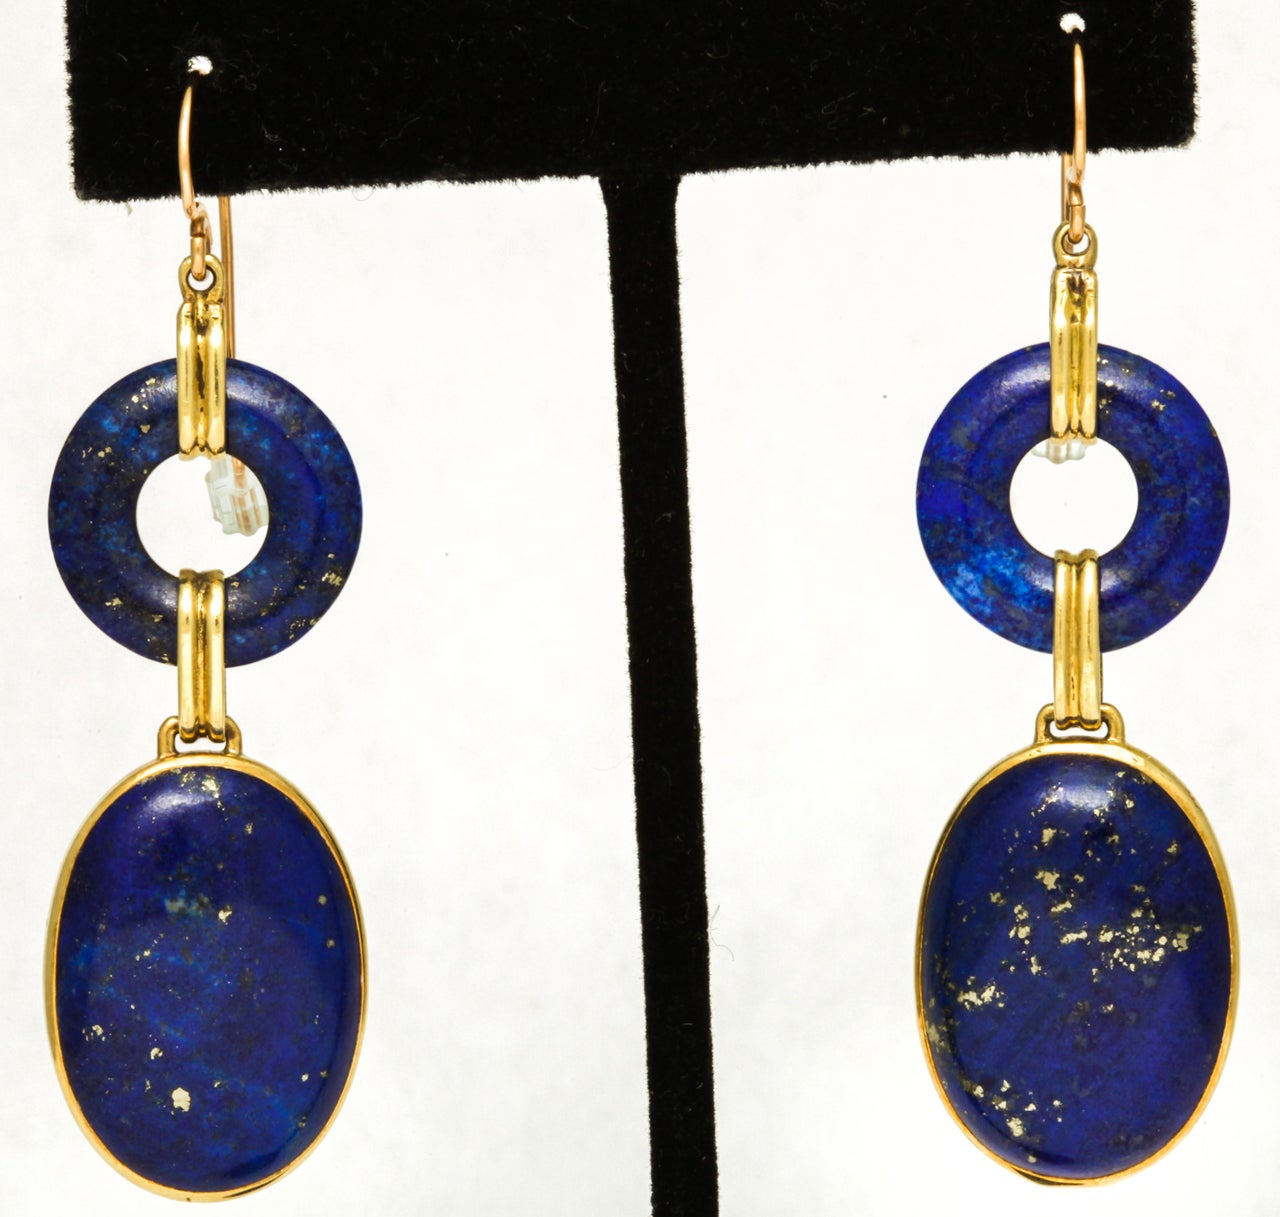 Attractive pair of Pierced Russian Lapis Earrings.   Gold flecked Lapis Ovals, bezel set in 14kt Yellow Gold & suspended from Lapis circles. Ca 1940-50